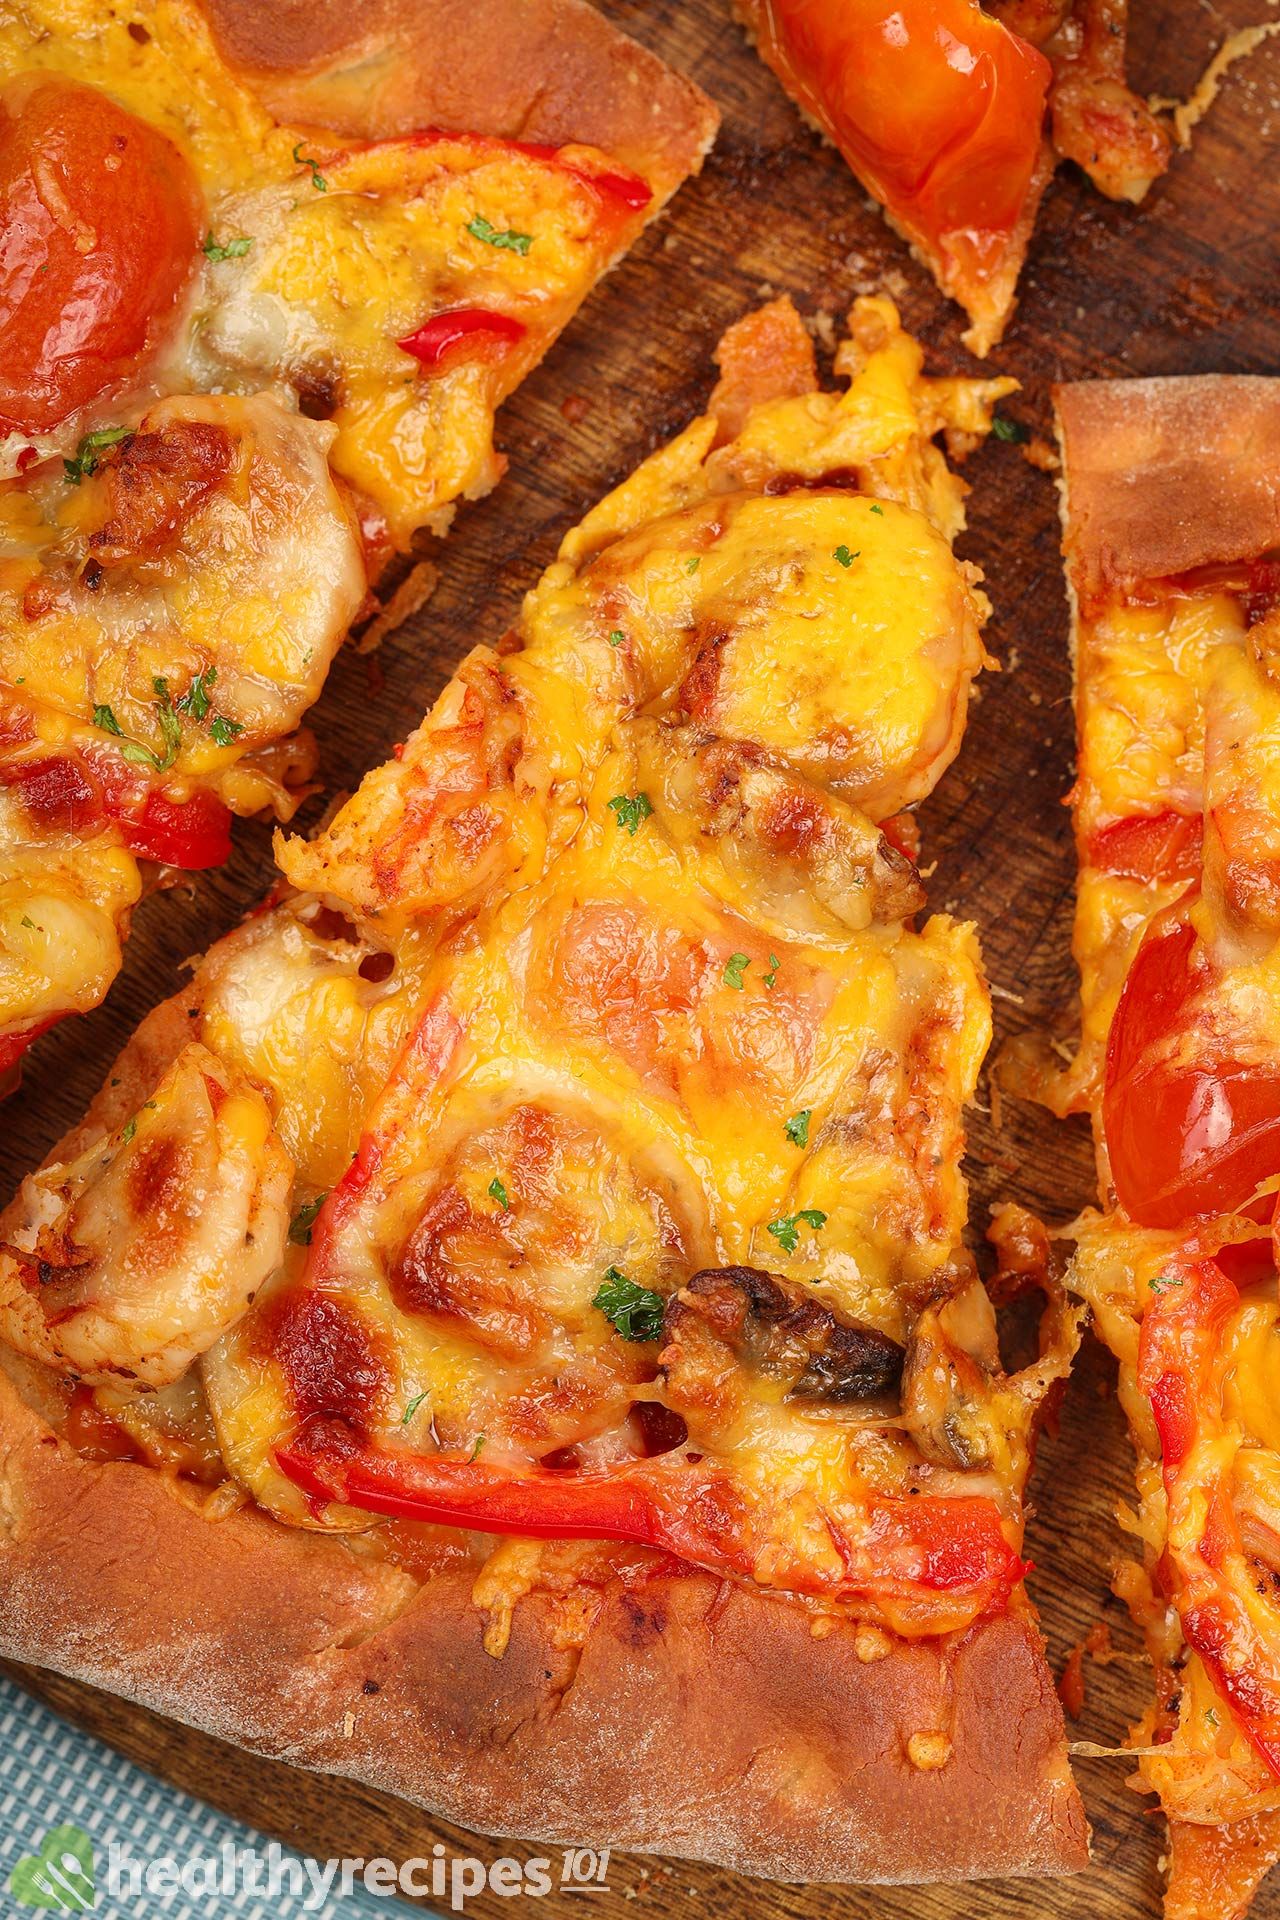 How to Store and Reheat Shrimp Pizza